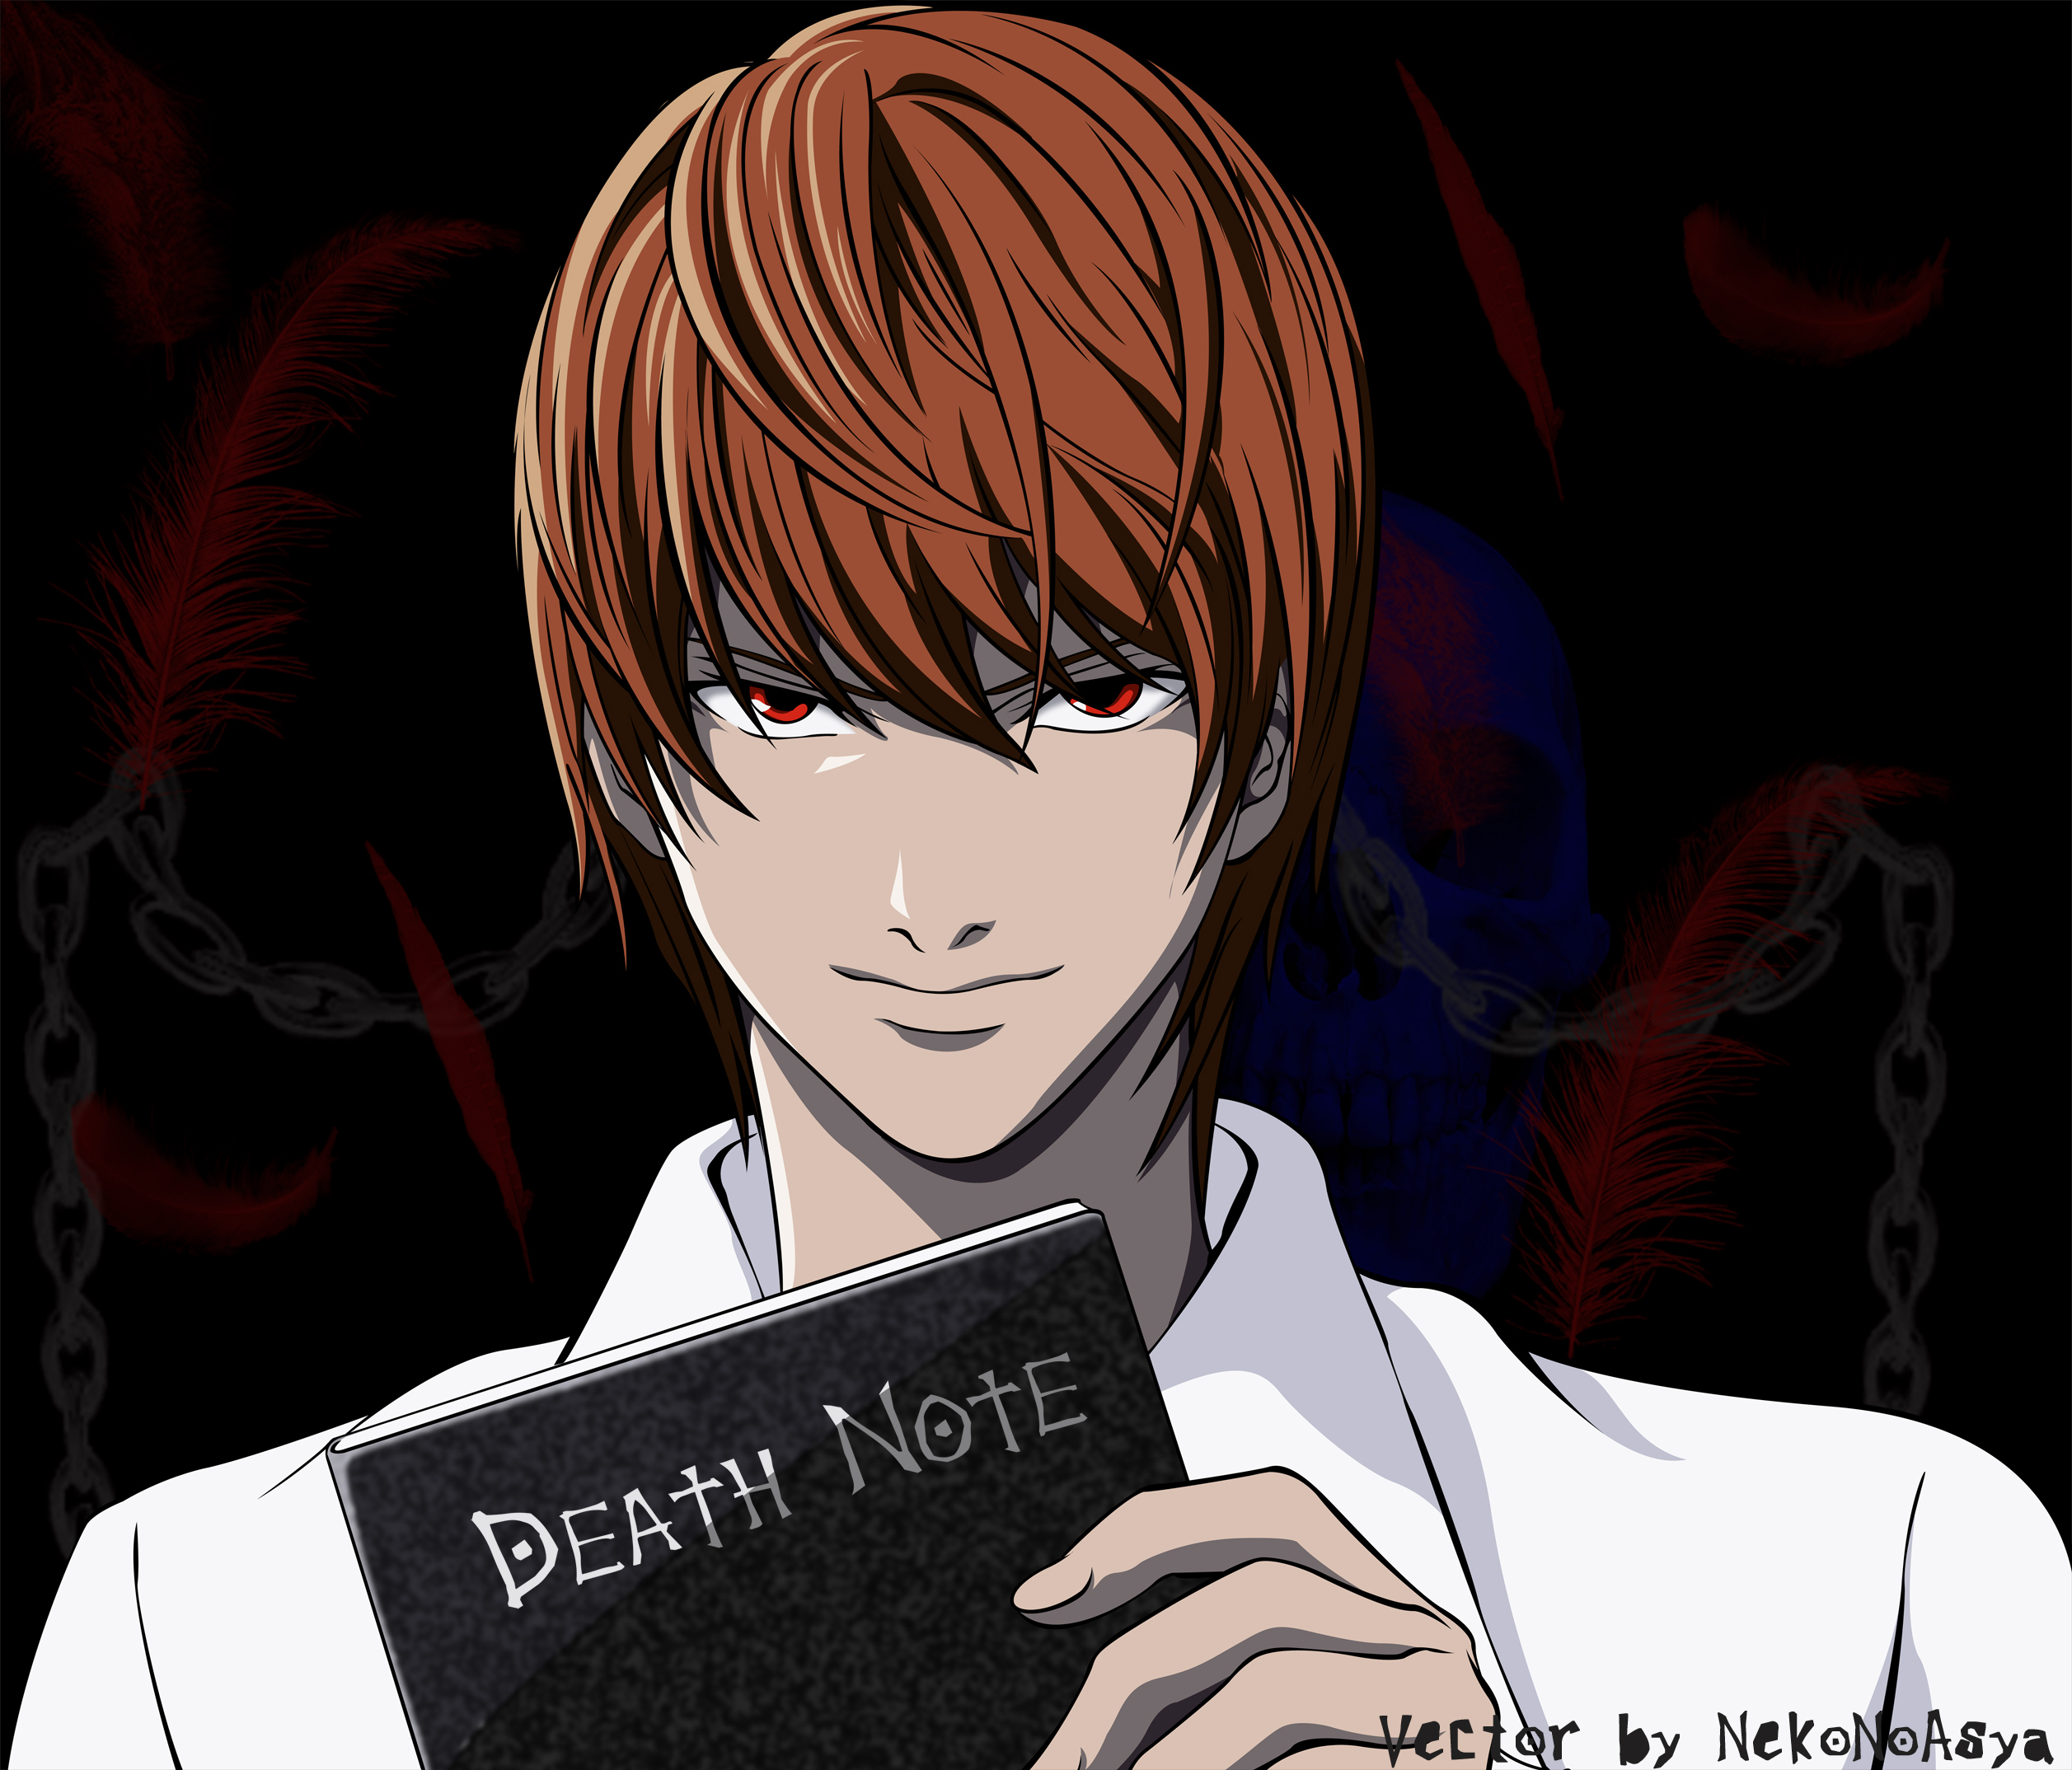 Death Note - latest news, breaking stories and comment - The Independent